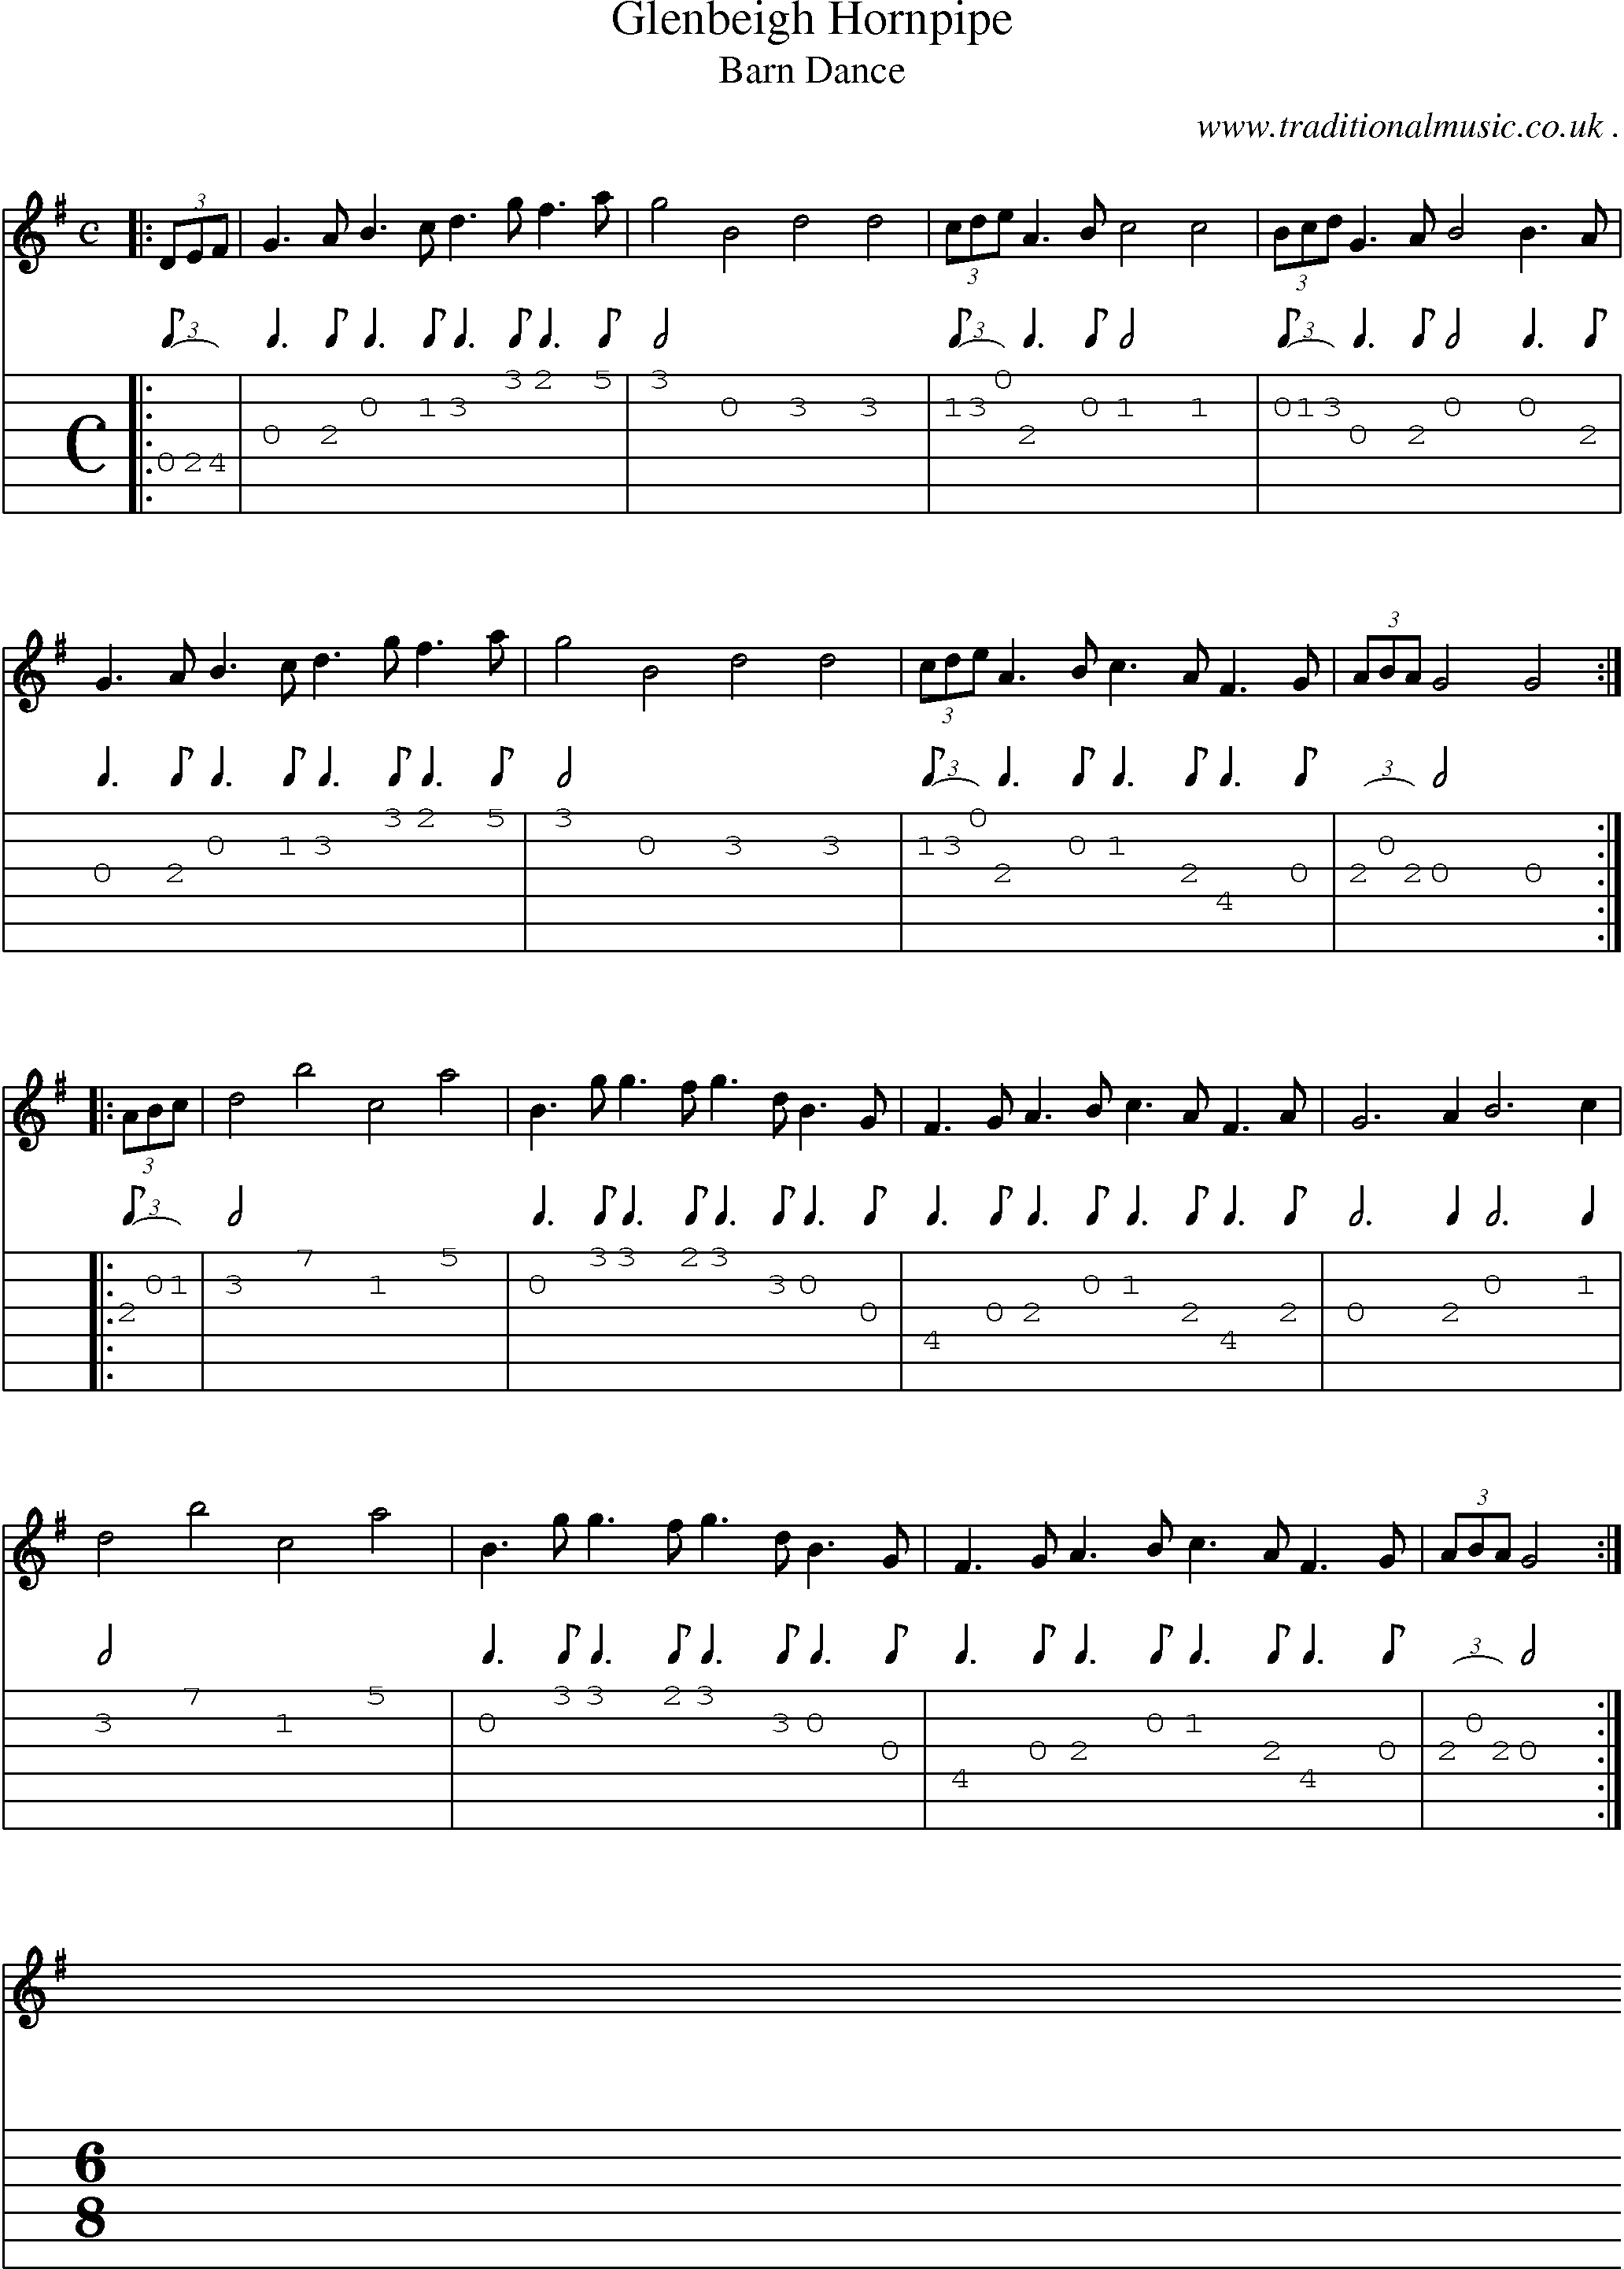 Sheet-Music and Guitar Tabs for Glenbeigh Hornpipe